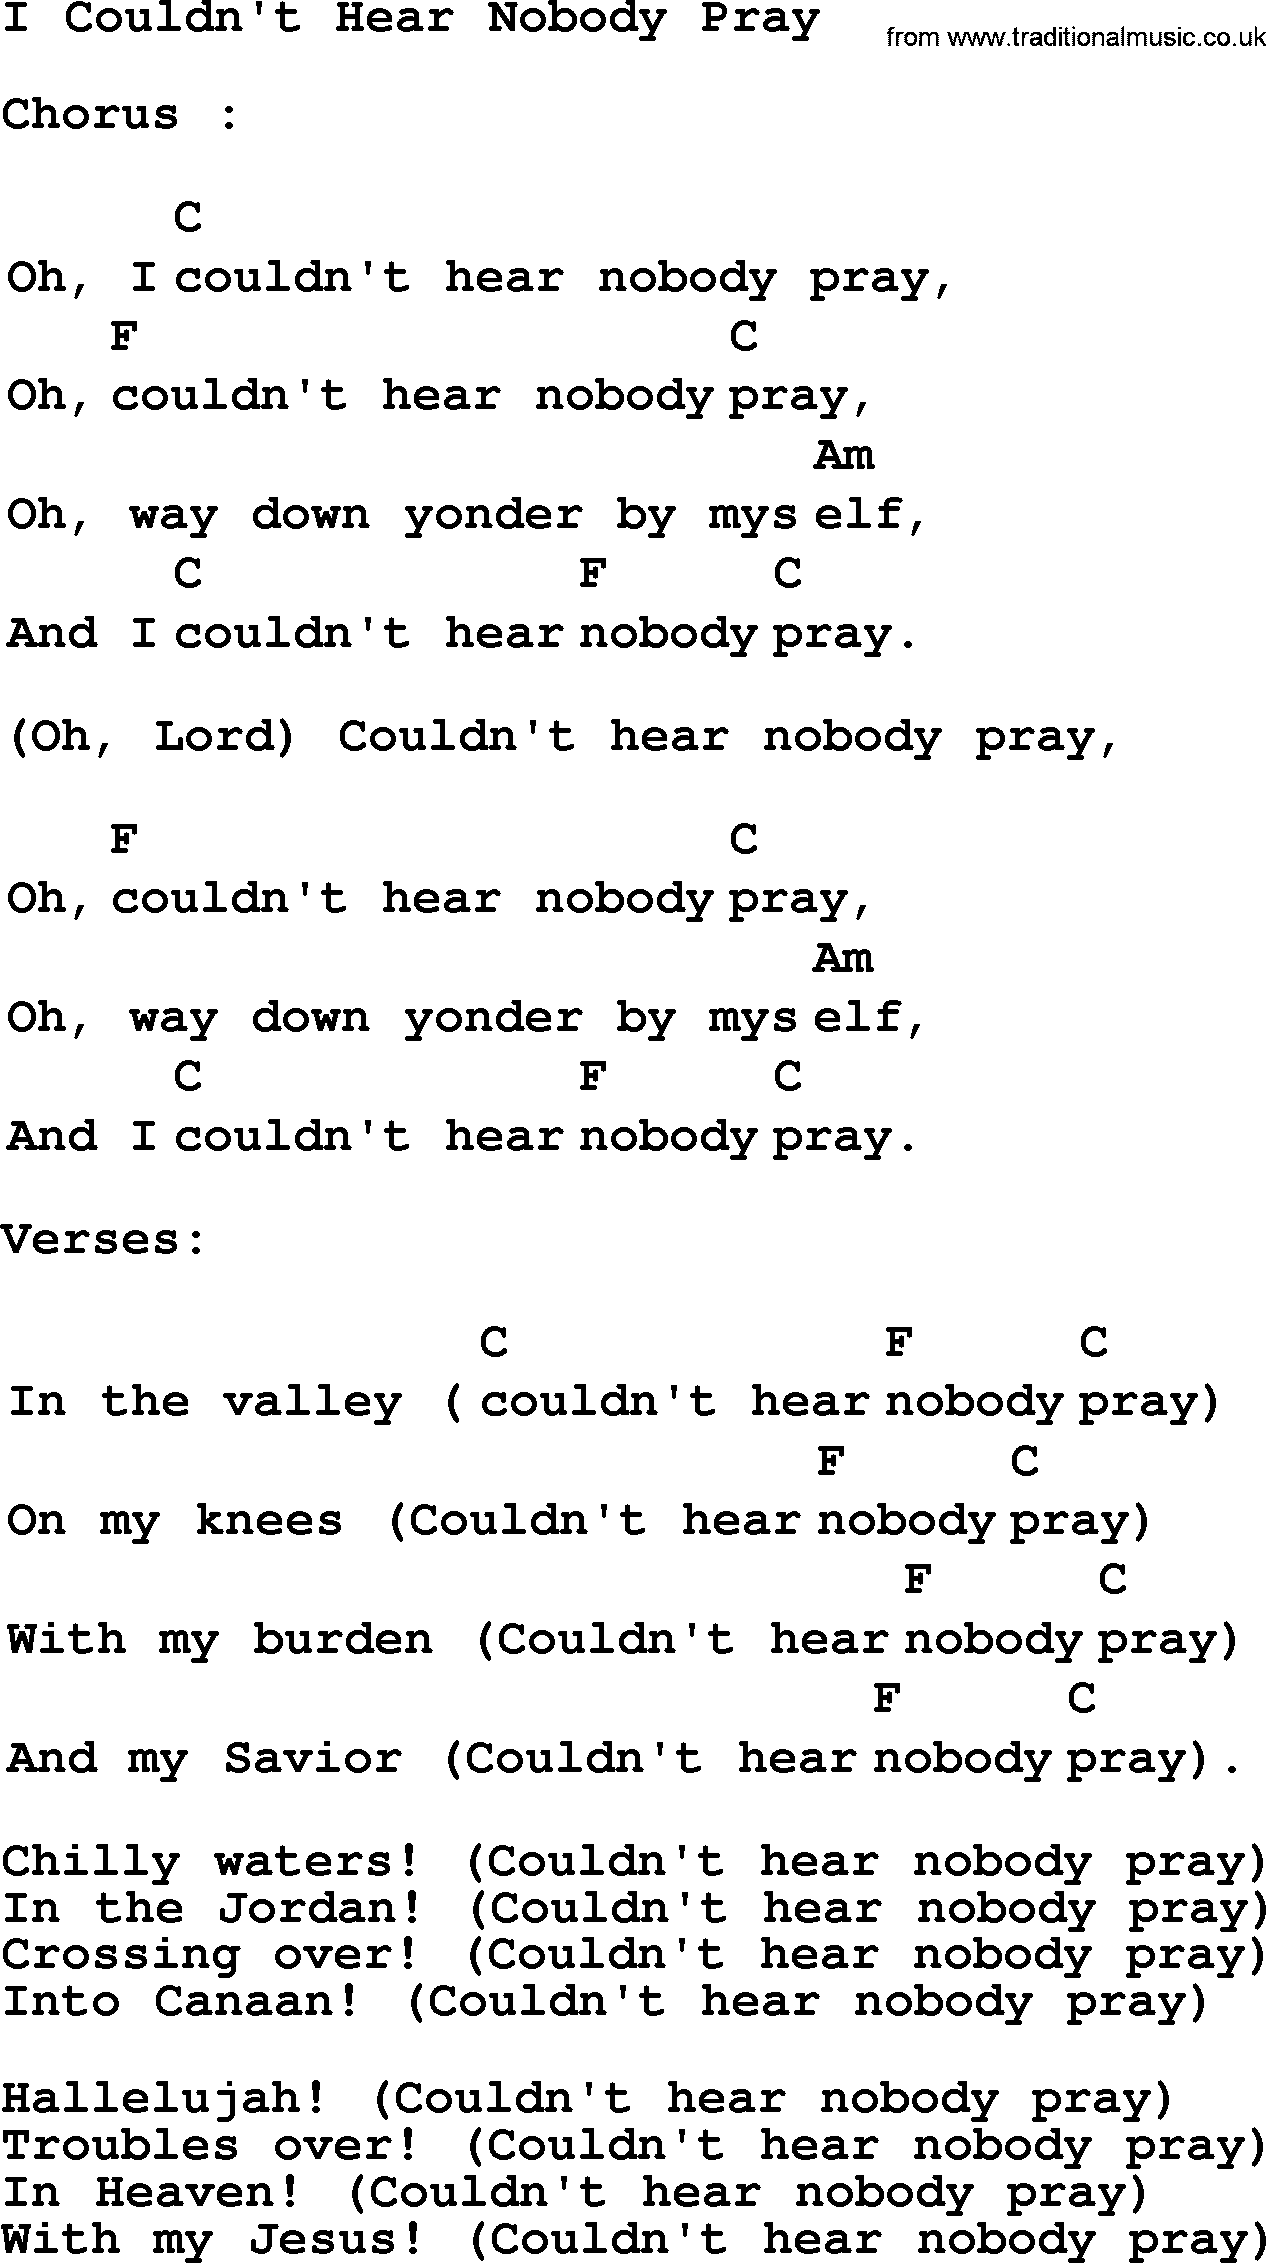 Top 1000 Most Popular Folk and Old-time Songs: I Couldnt Hear Nobody Pray, lyrics and chords